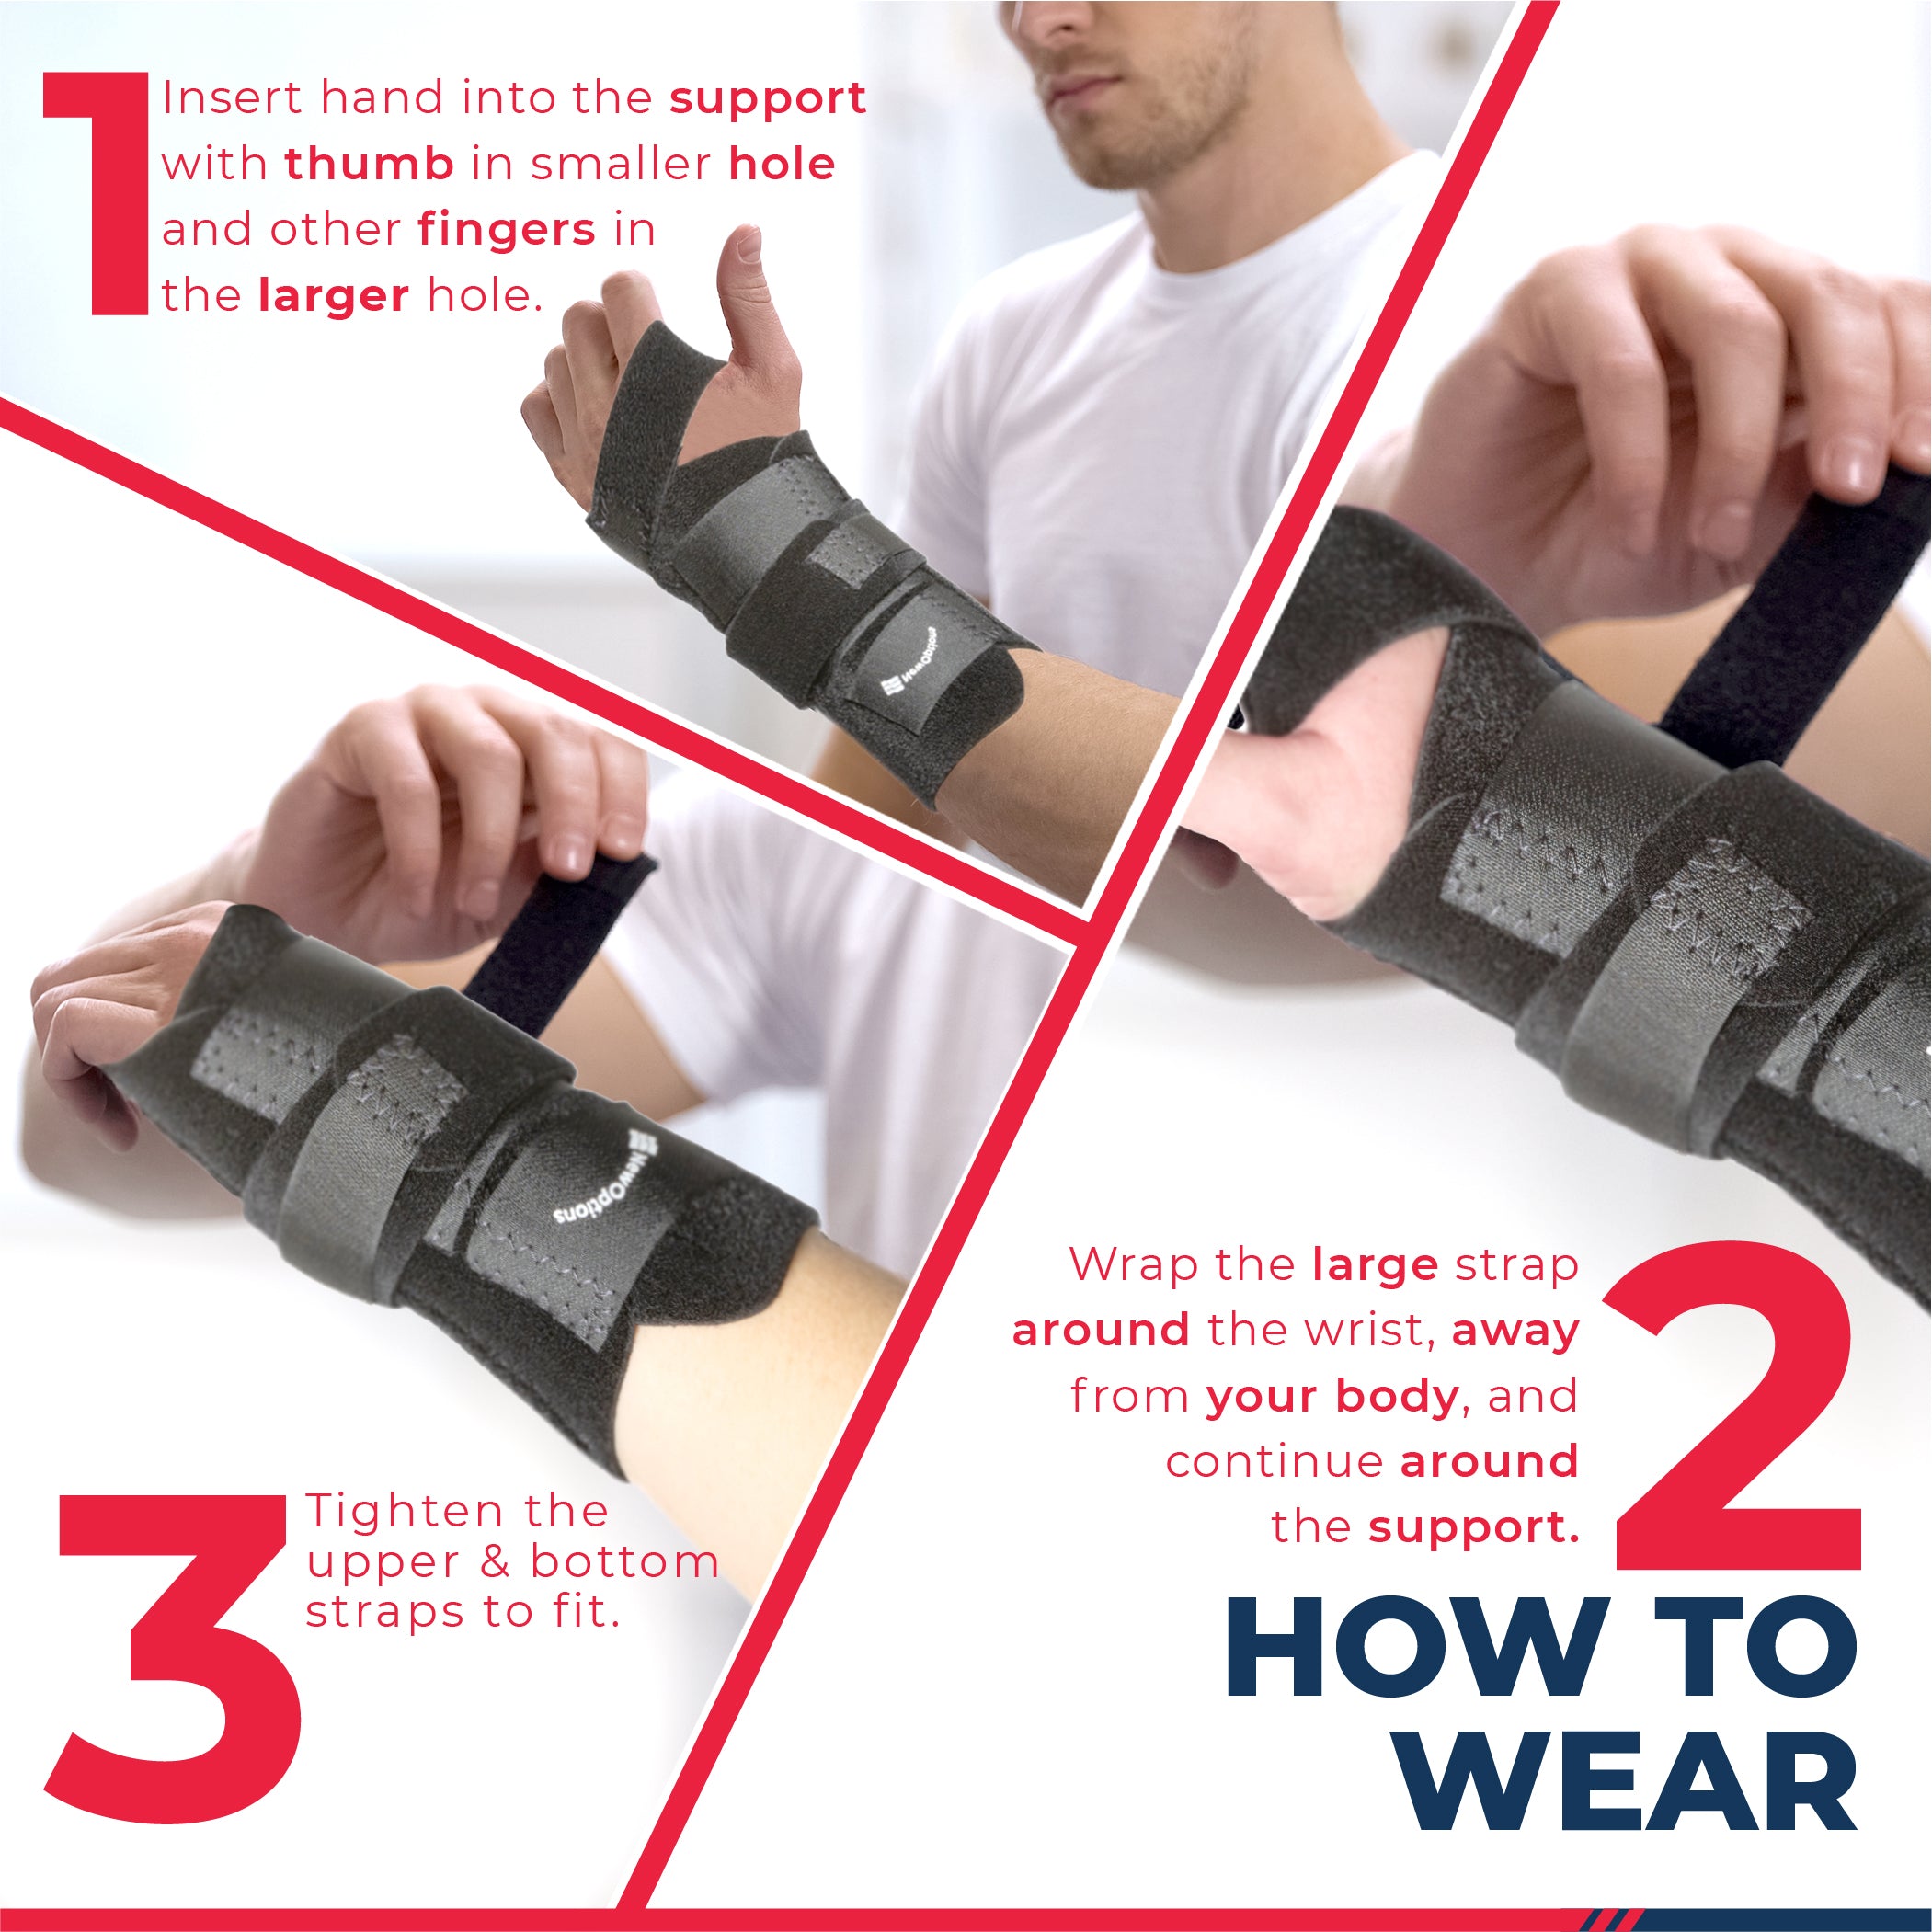 How To Put On Wrist Wraps The PROPER Way + How Tight